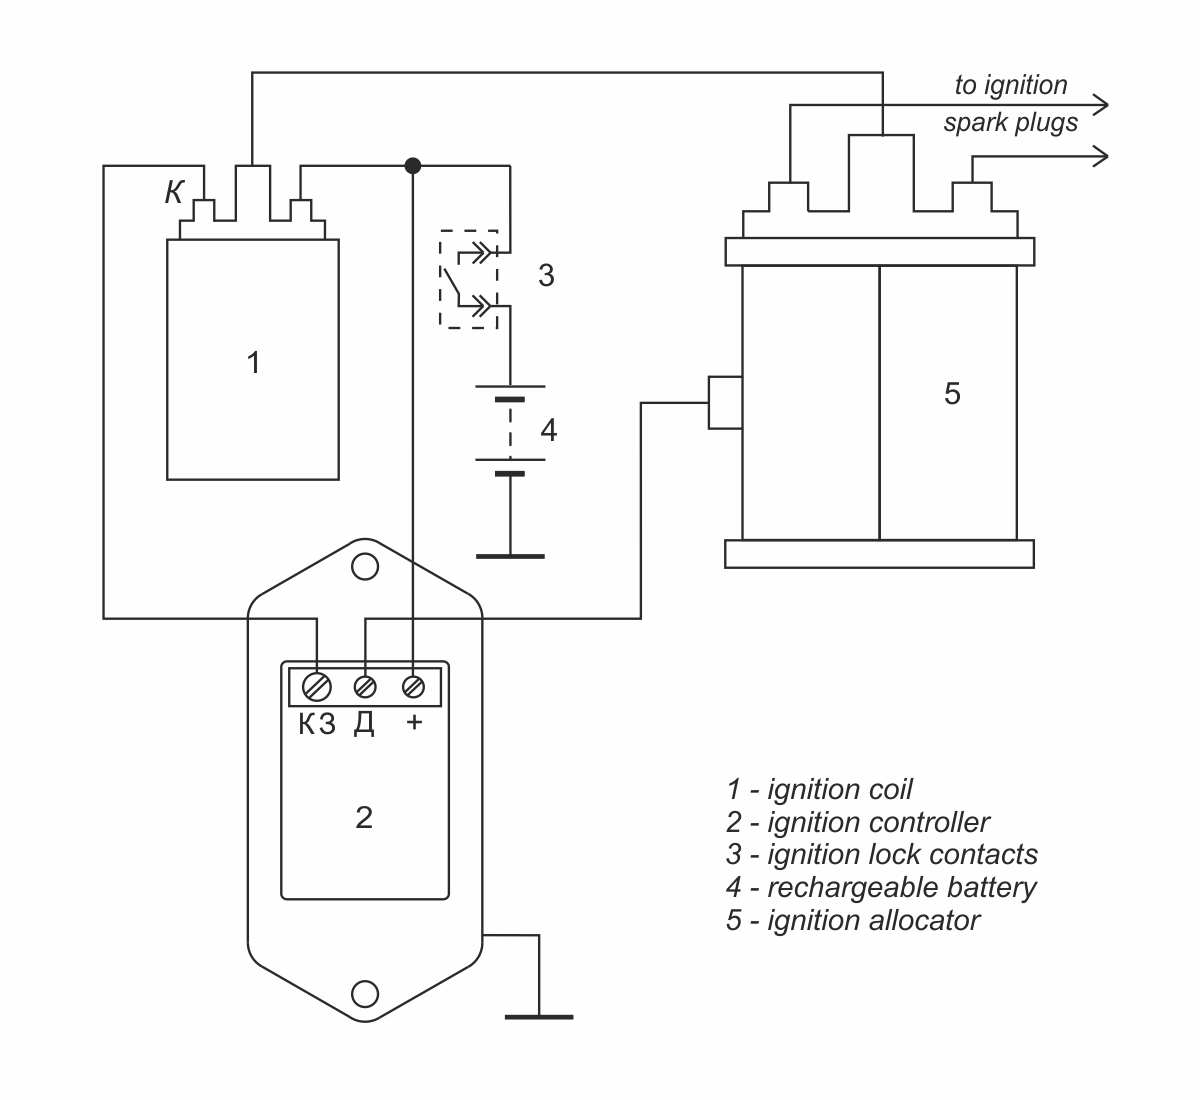 Connection diagram of ignition controller 131.3734-11